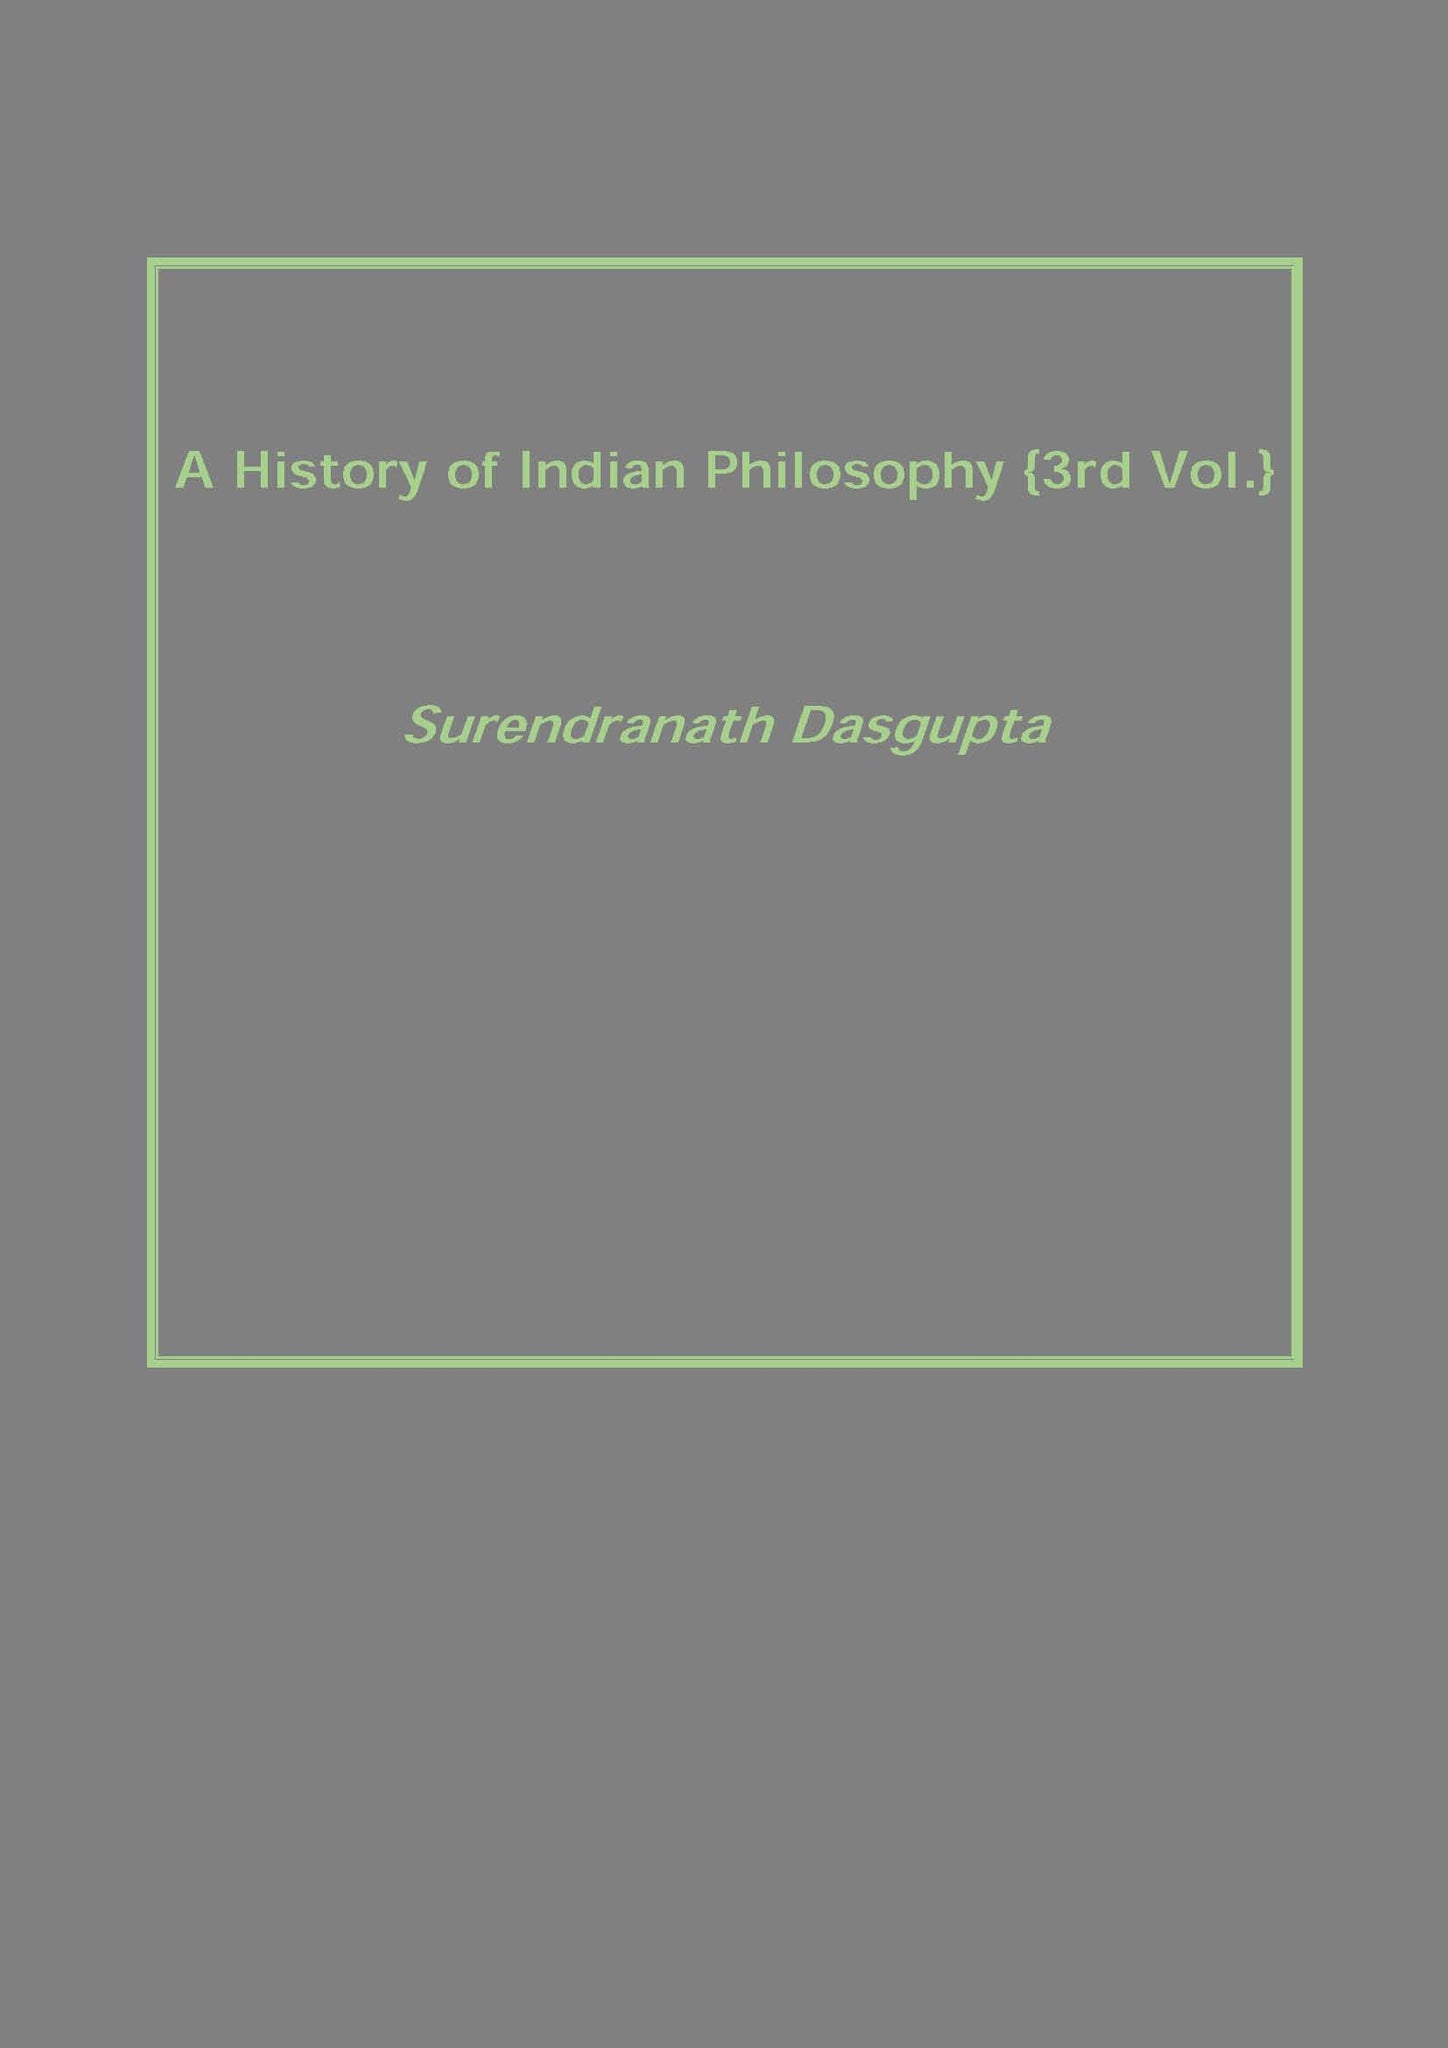 A History of Indian Philosophy Volume Vol. 3rd